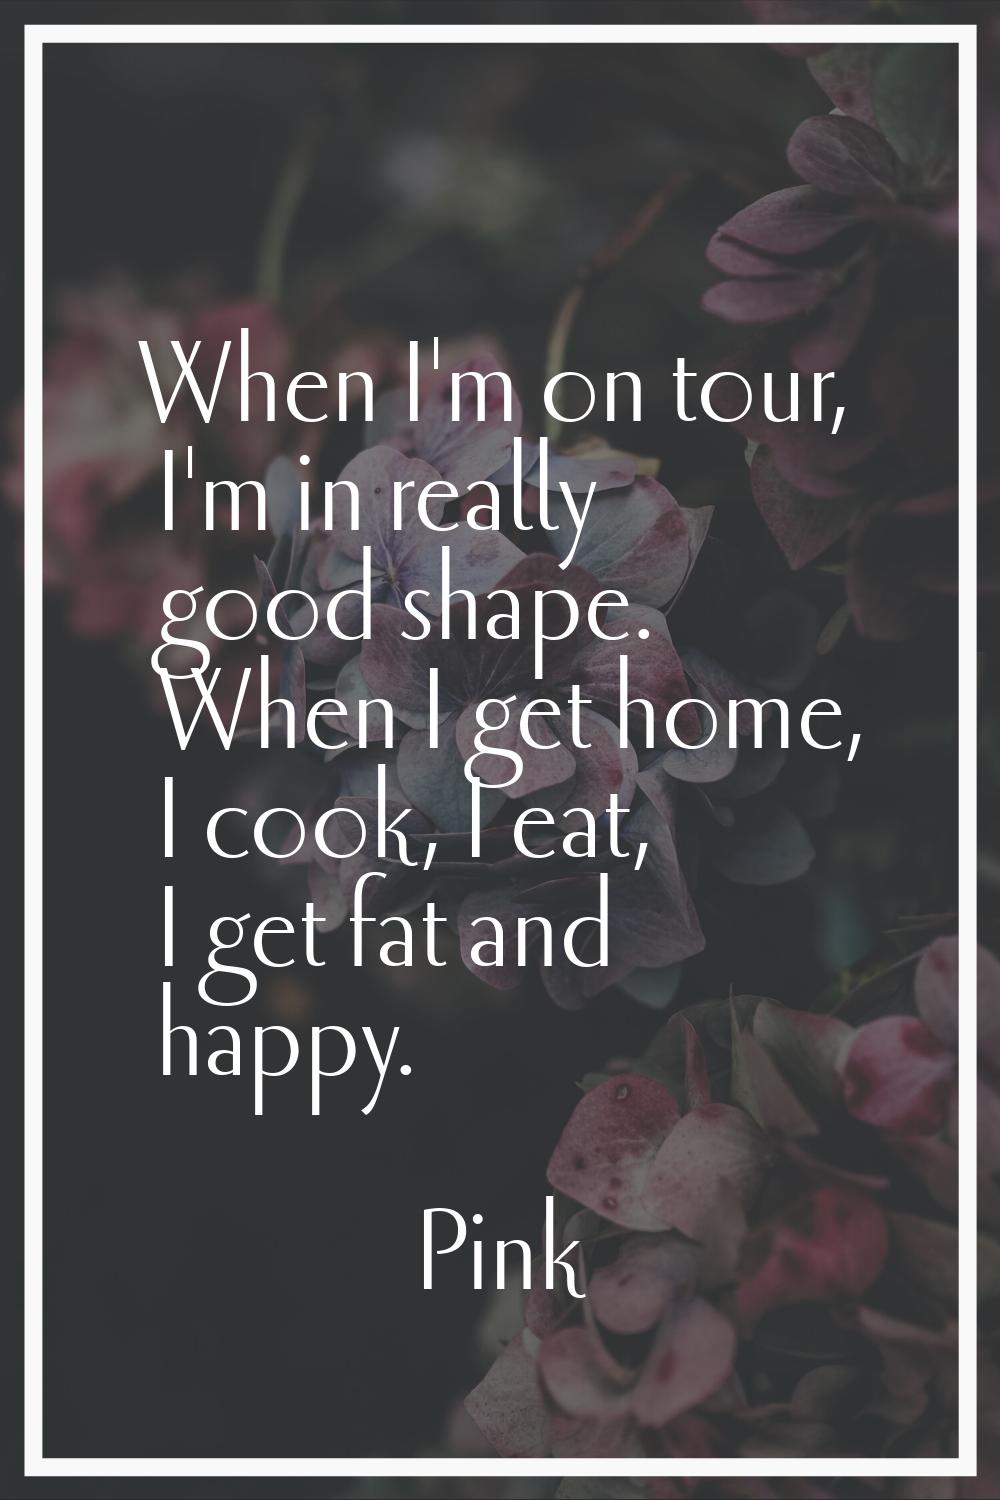 When I'm on tour, I'm in really good shape. When I get home, I cook, I eat, I get fat and happy.